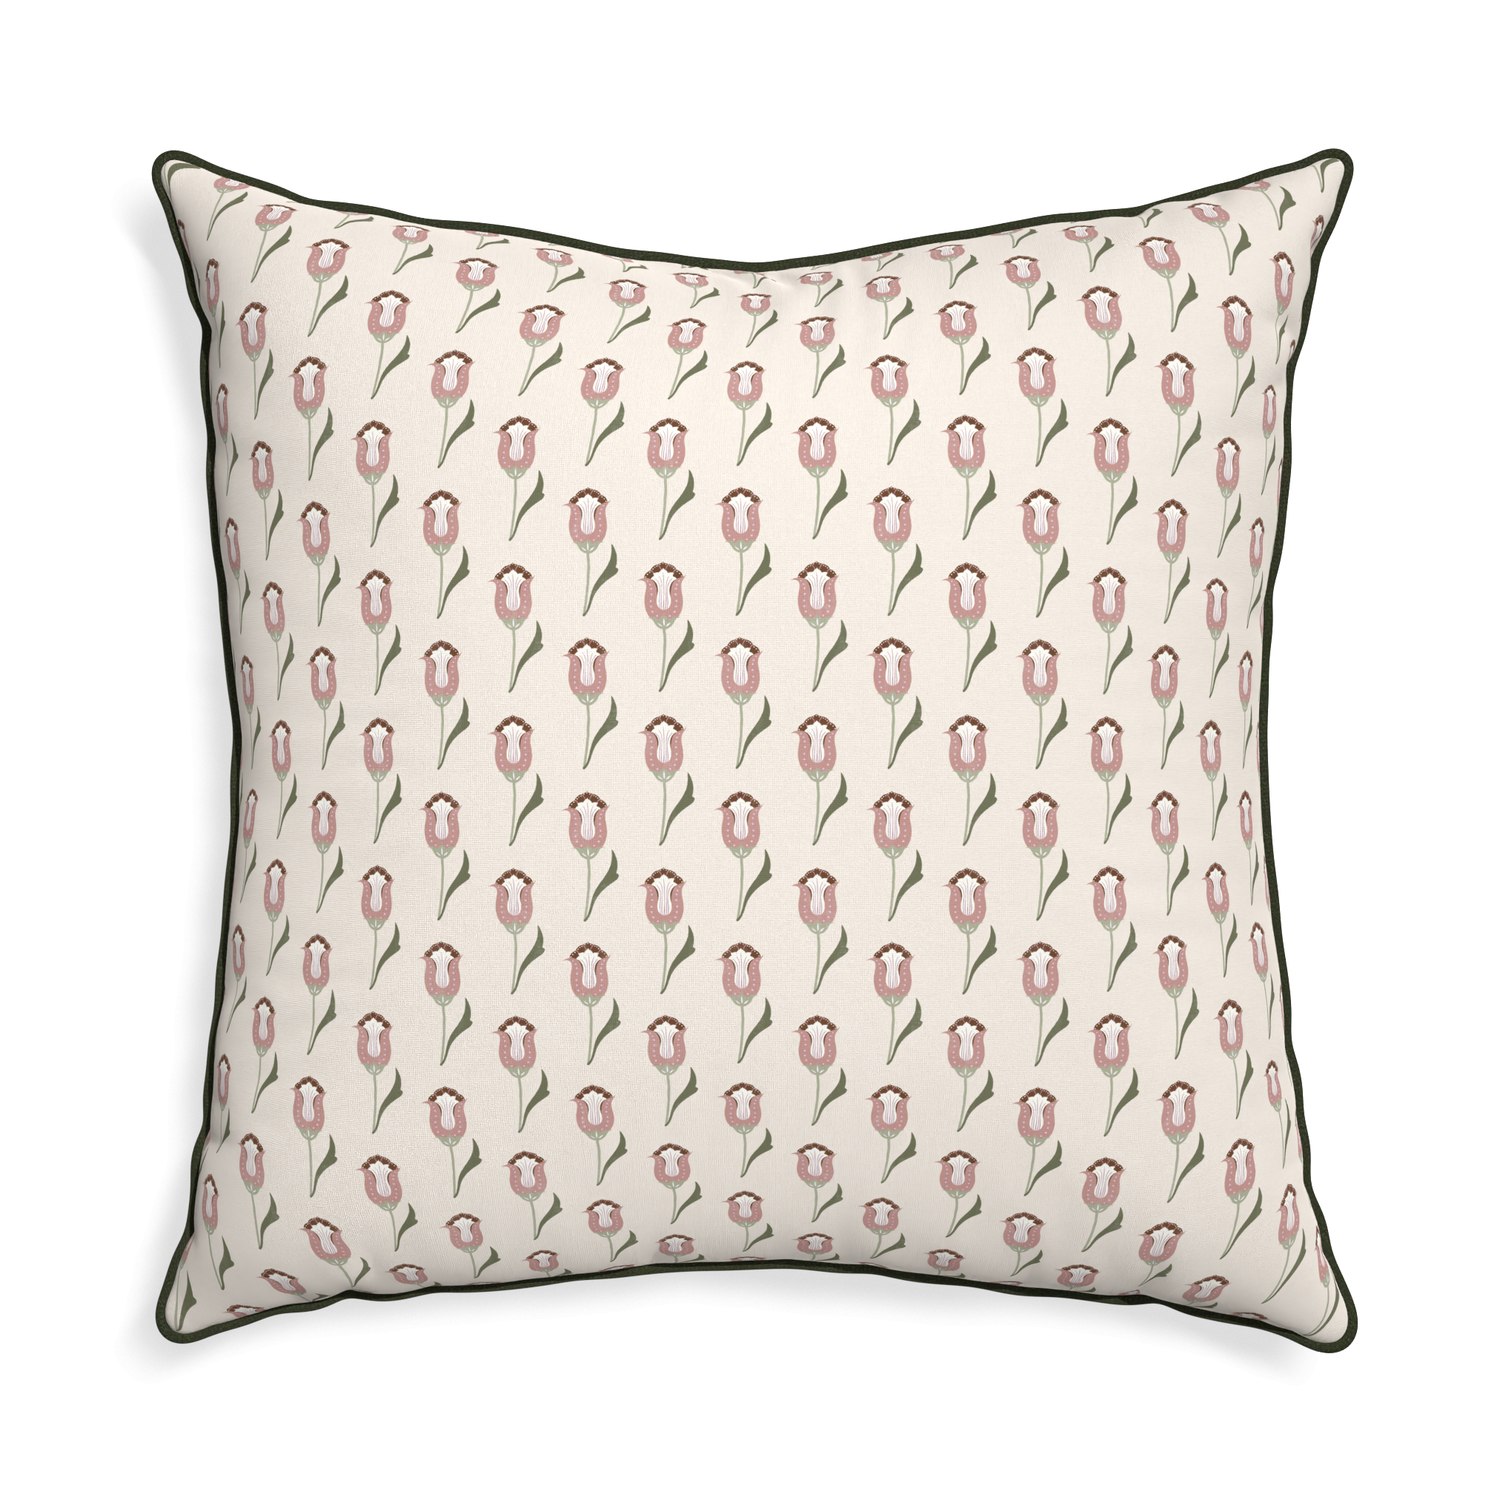 Euro-sham annabelle orchid custom pink tulippillow with f piping on white background